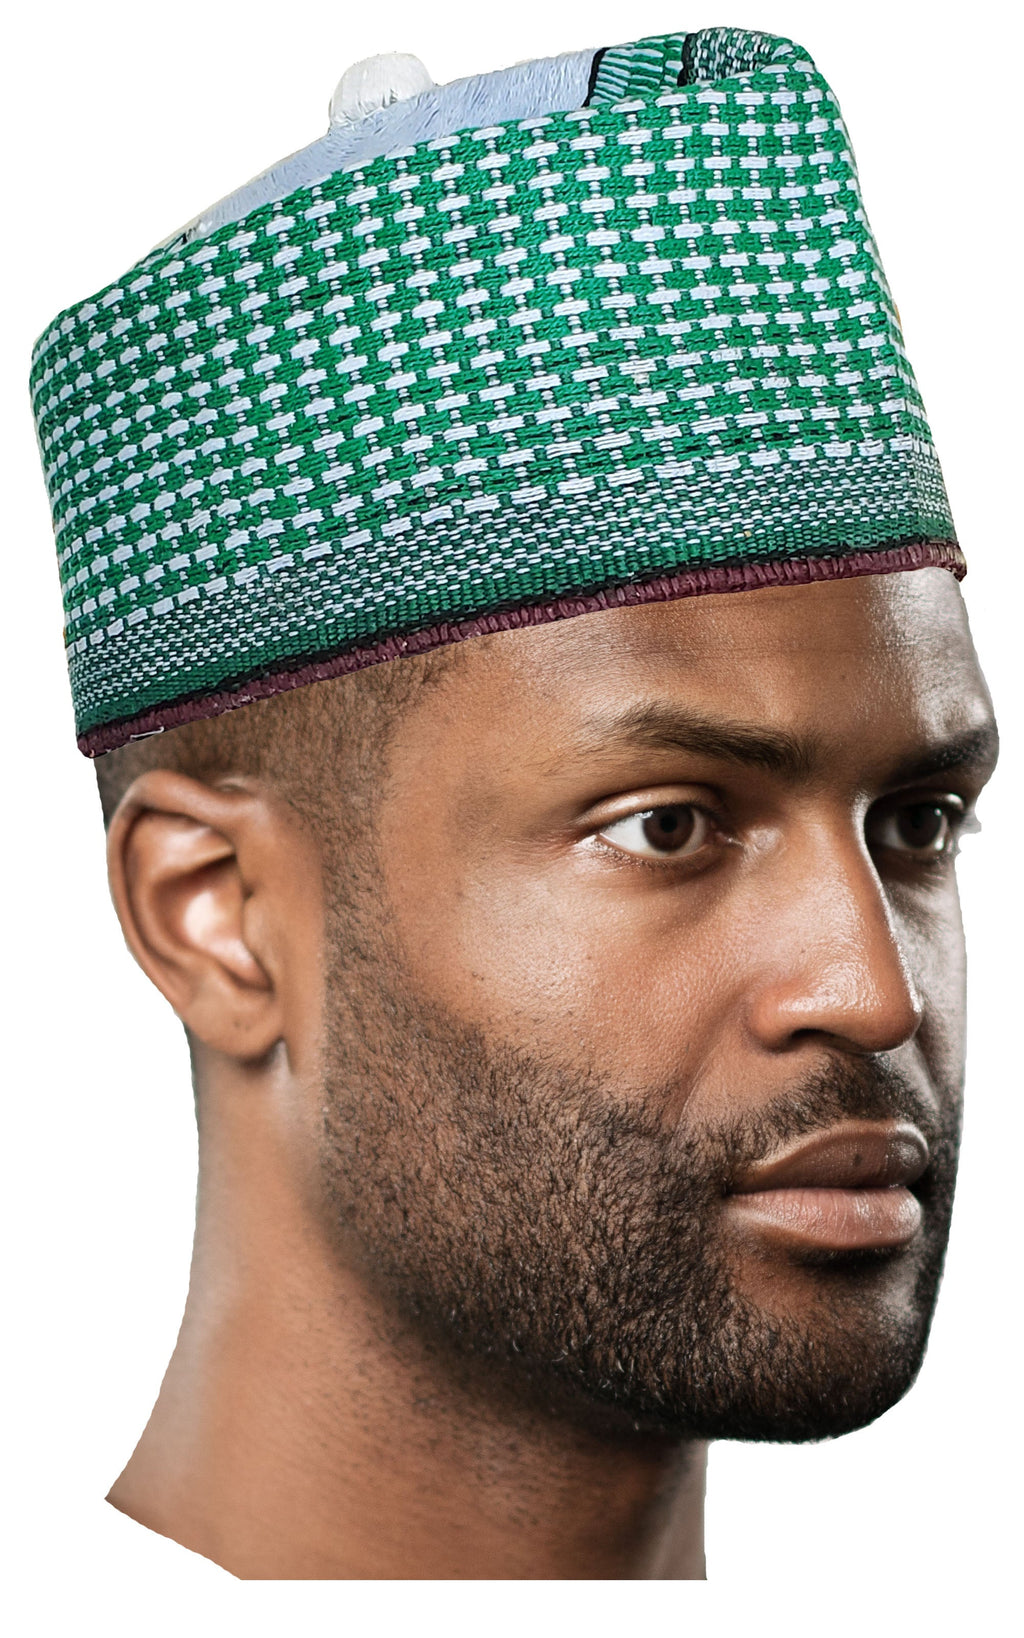 Suleimani Green and White Hausa Mallam Cap Fulani Hula Hand-Crafted African Traditional Kufi hat DPH626